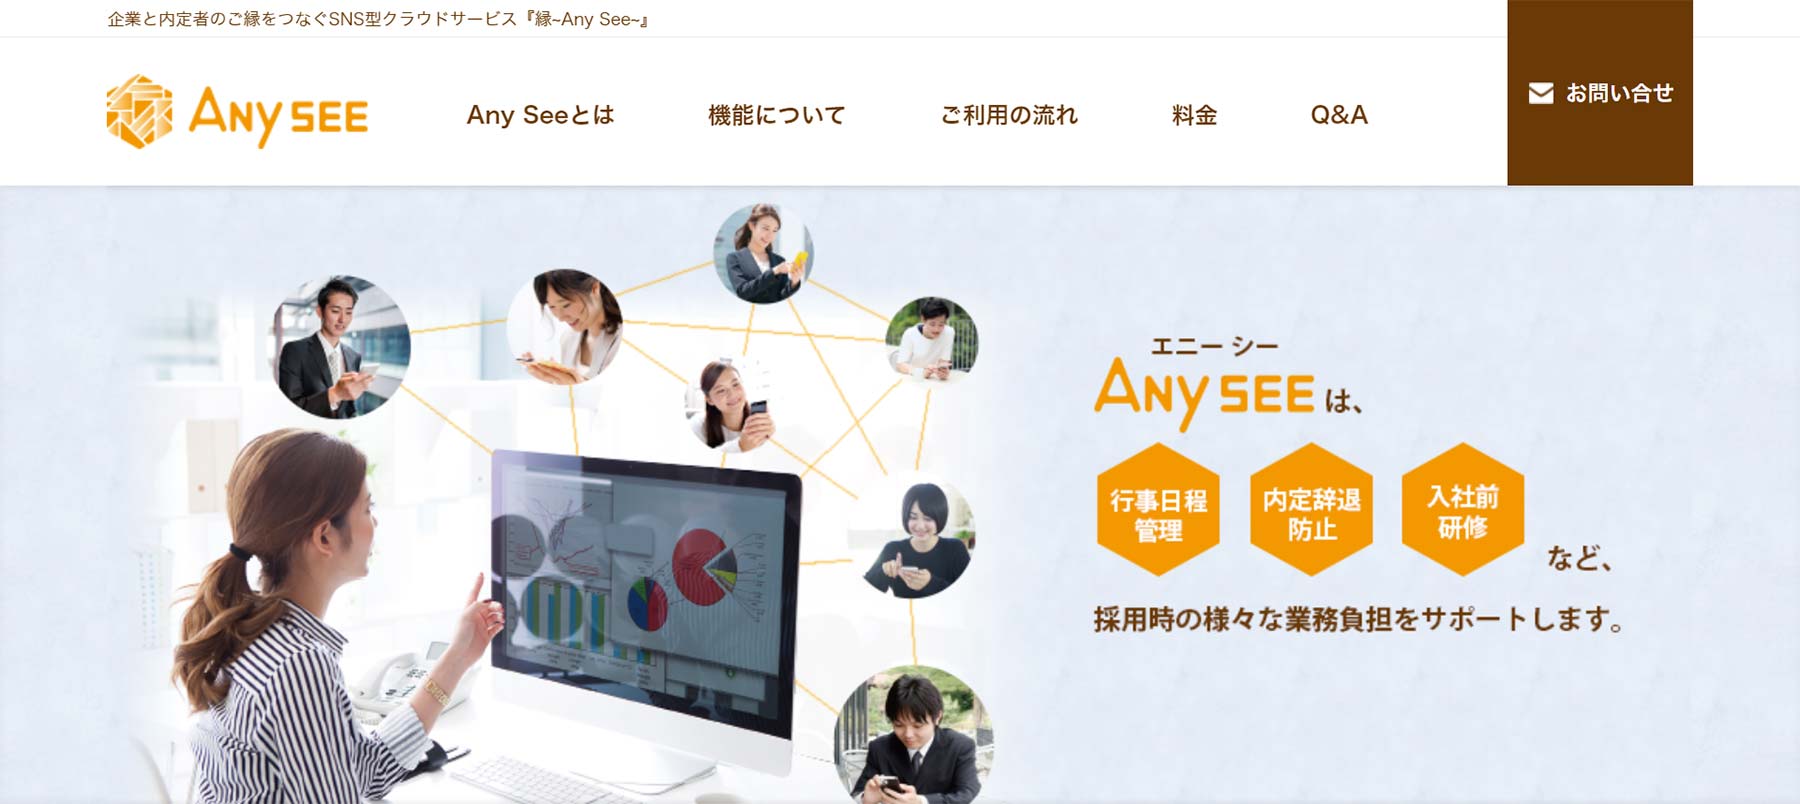 Any See公式Webサイト